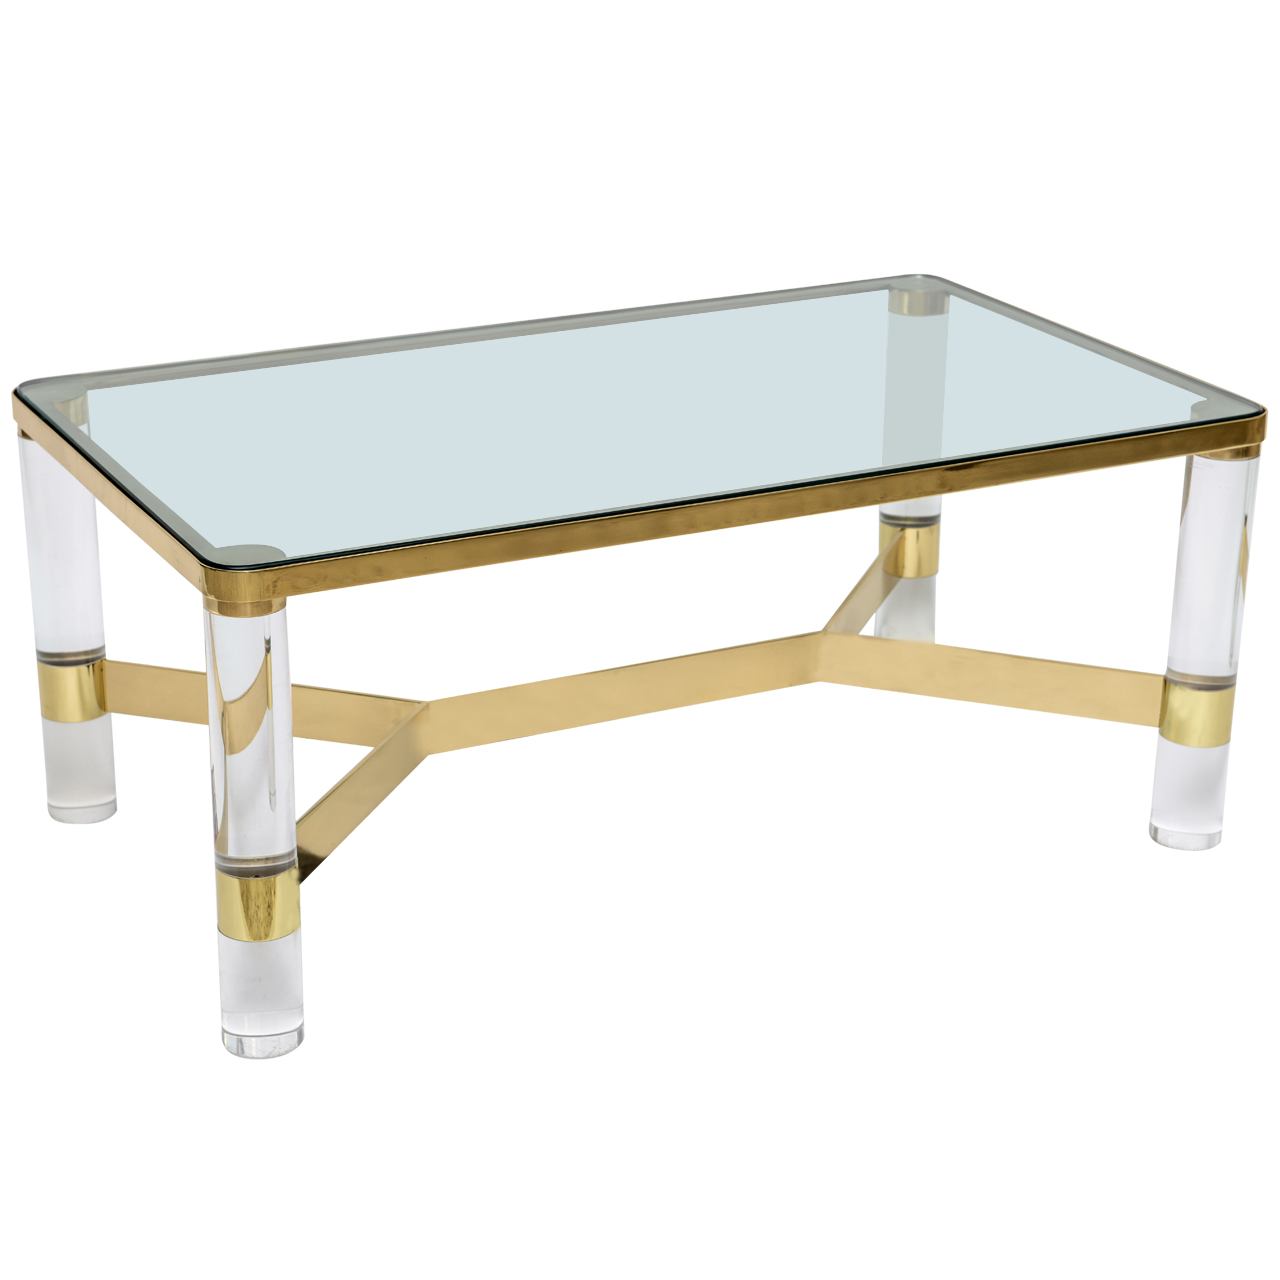 Karl Springer lucite and brass coffee table 1st dibs